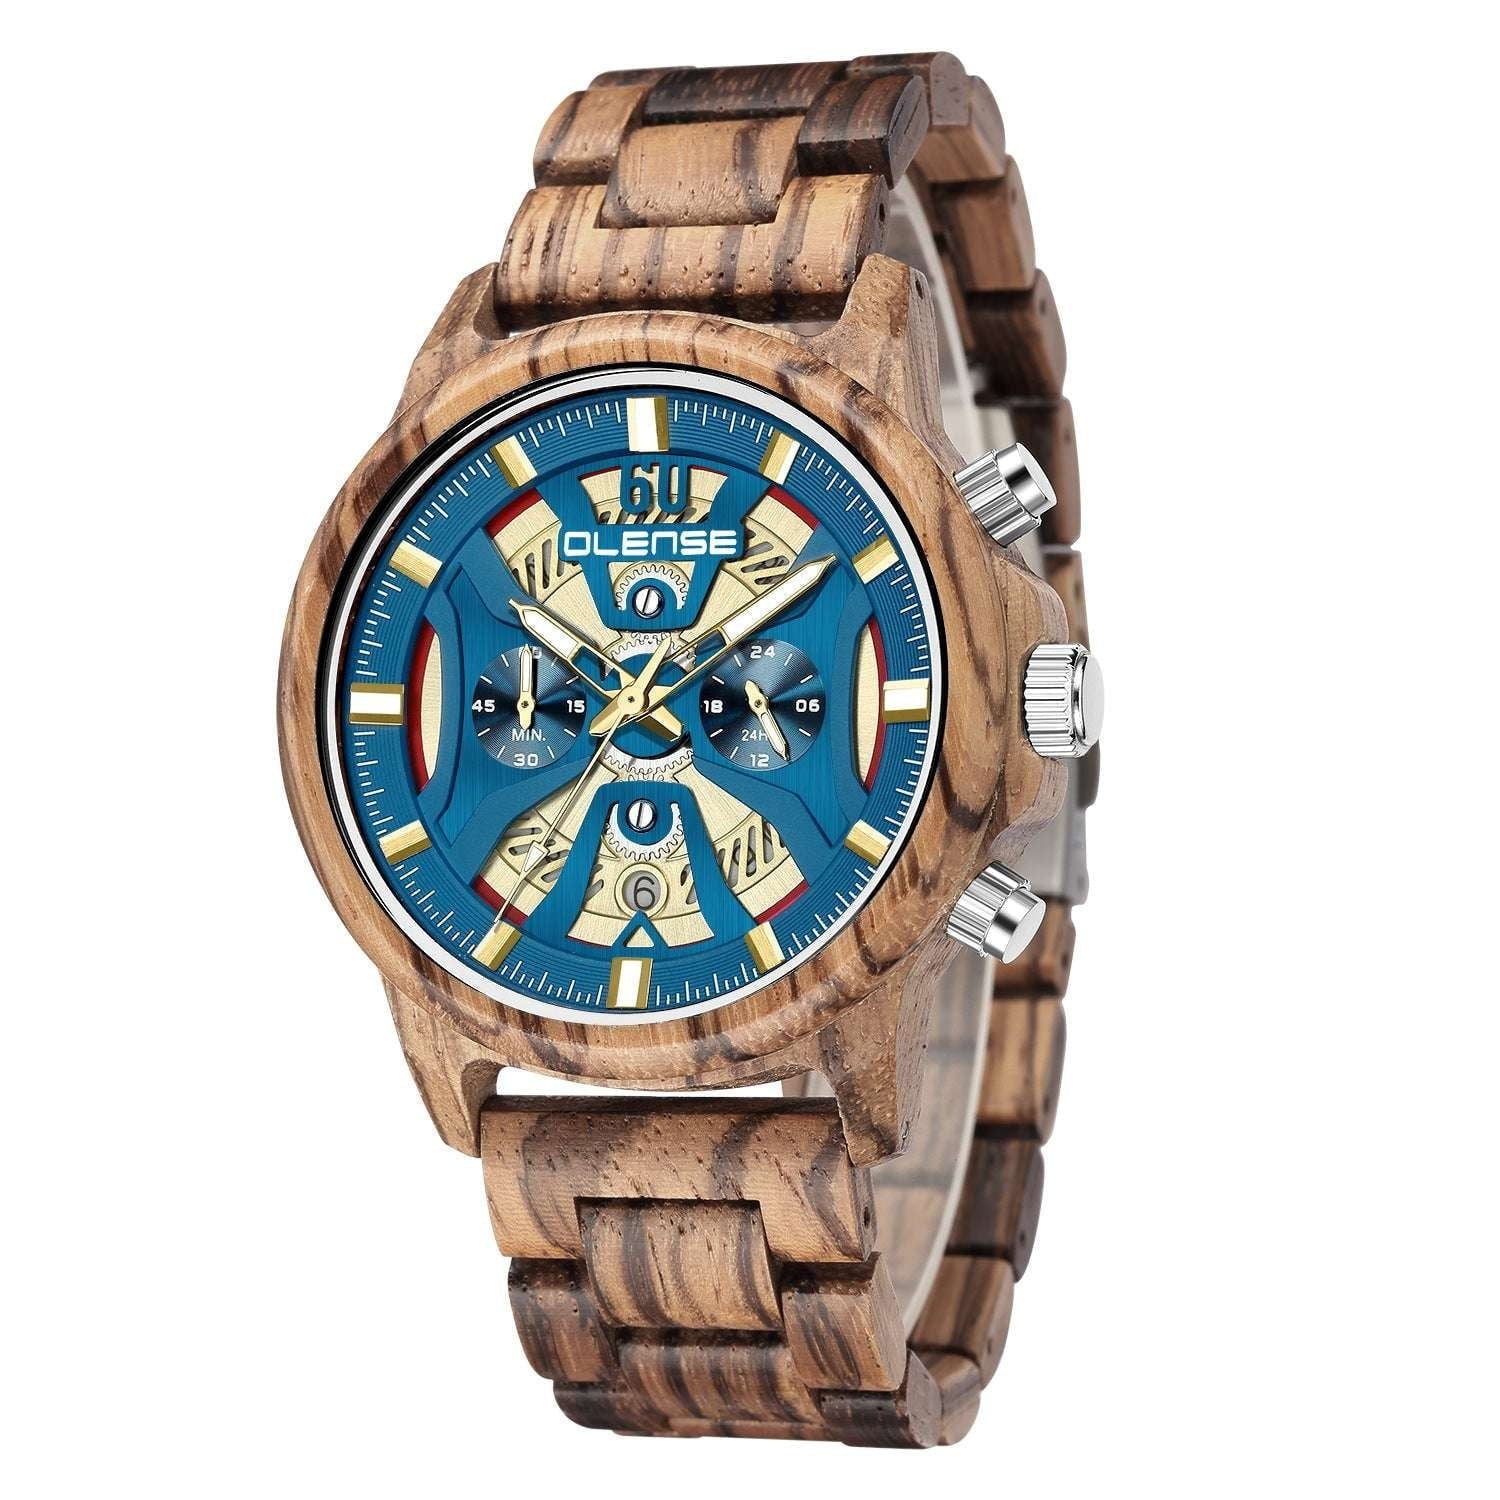 Eco-Friendly Wooden Watch, Handcrafted Wood Timepiece, Unique Men's Watch - available at Sparq Mart